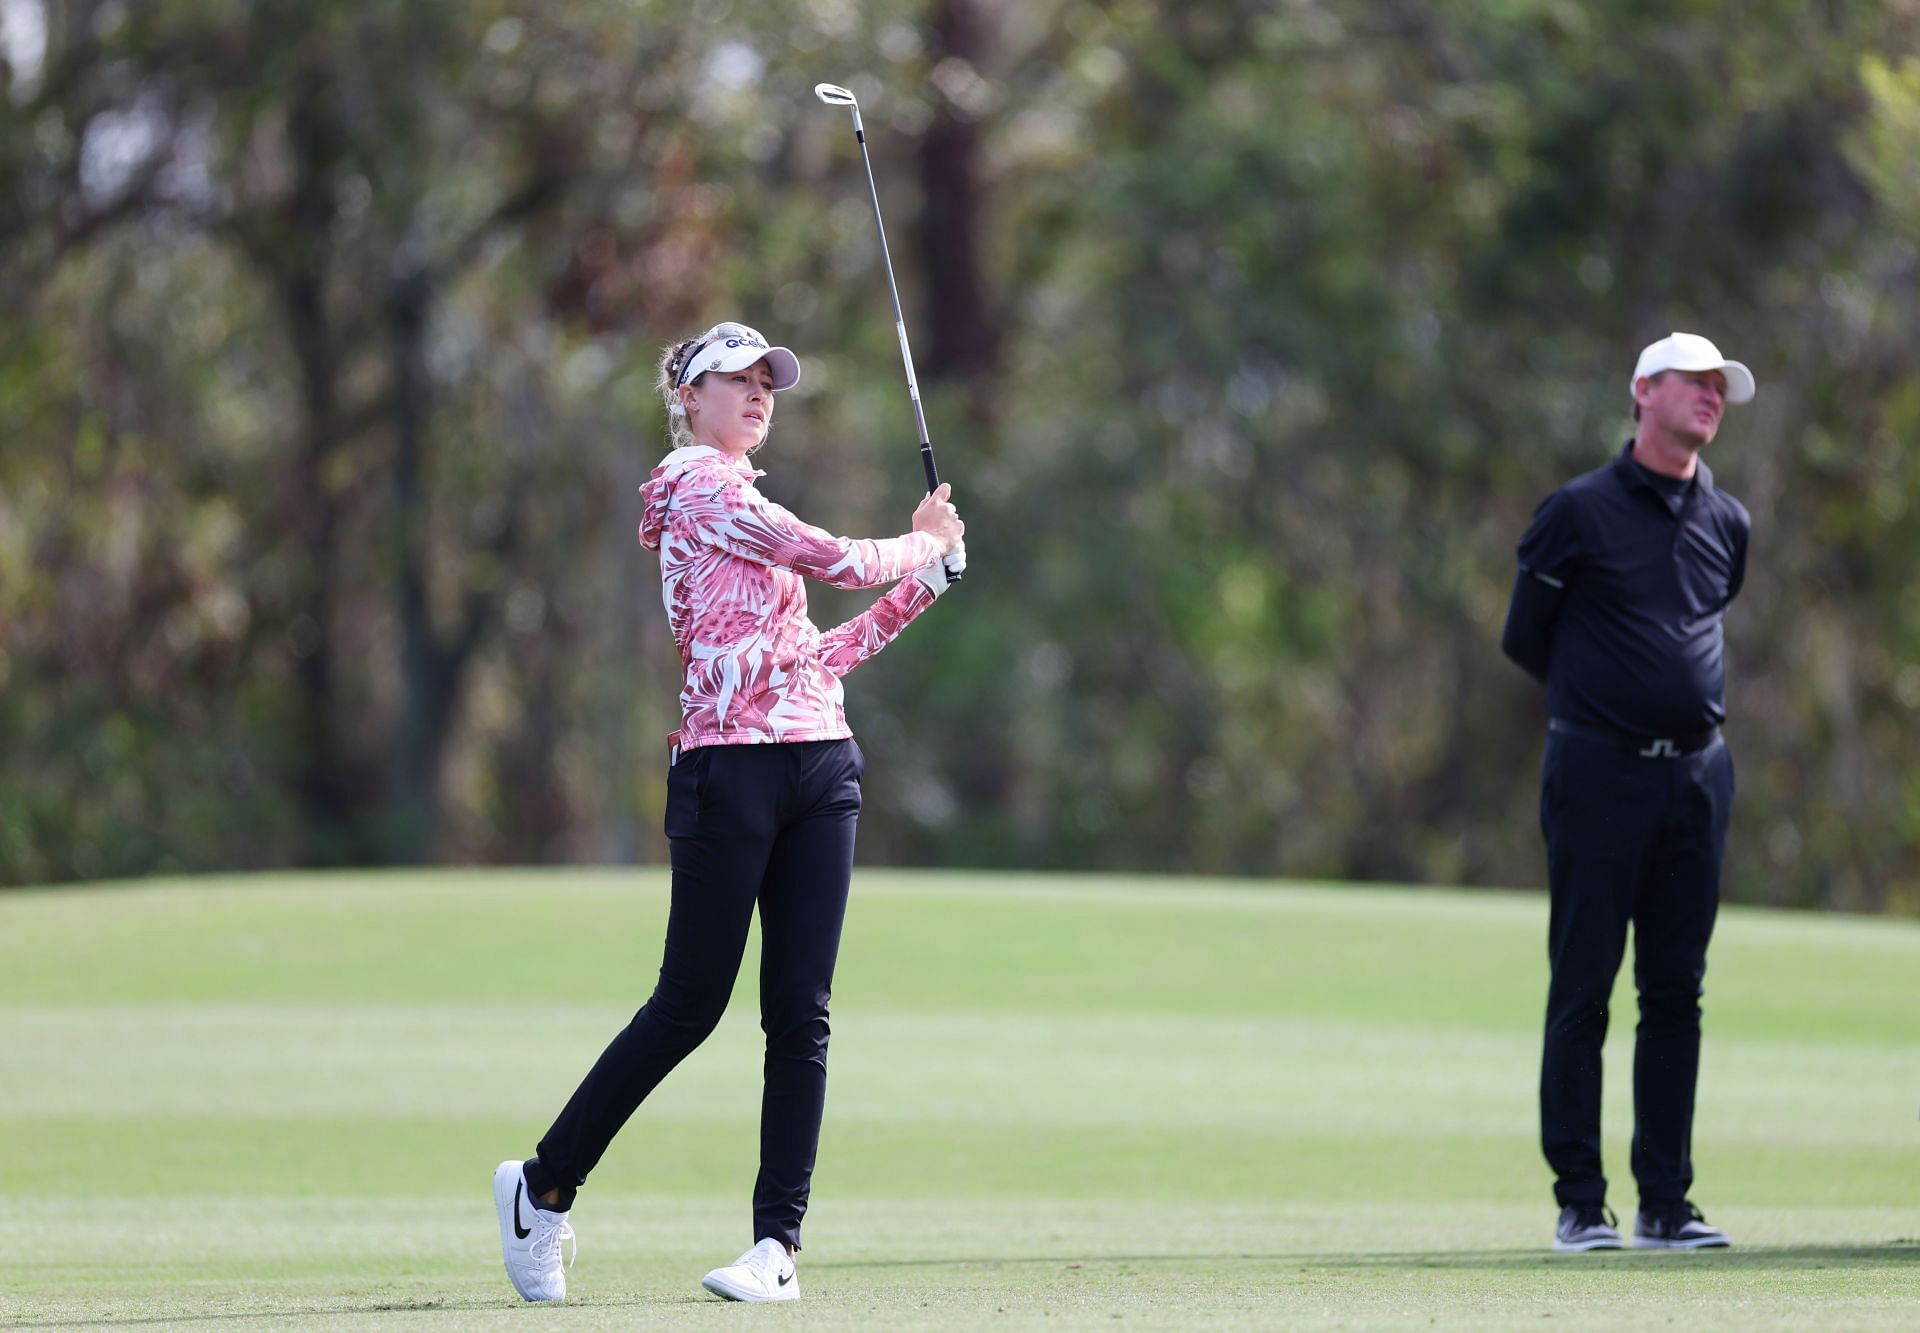 Nelly Korda and Petr Korda (Image via Mike Ehrmann/Getty Images)